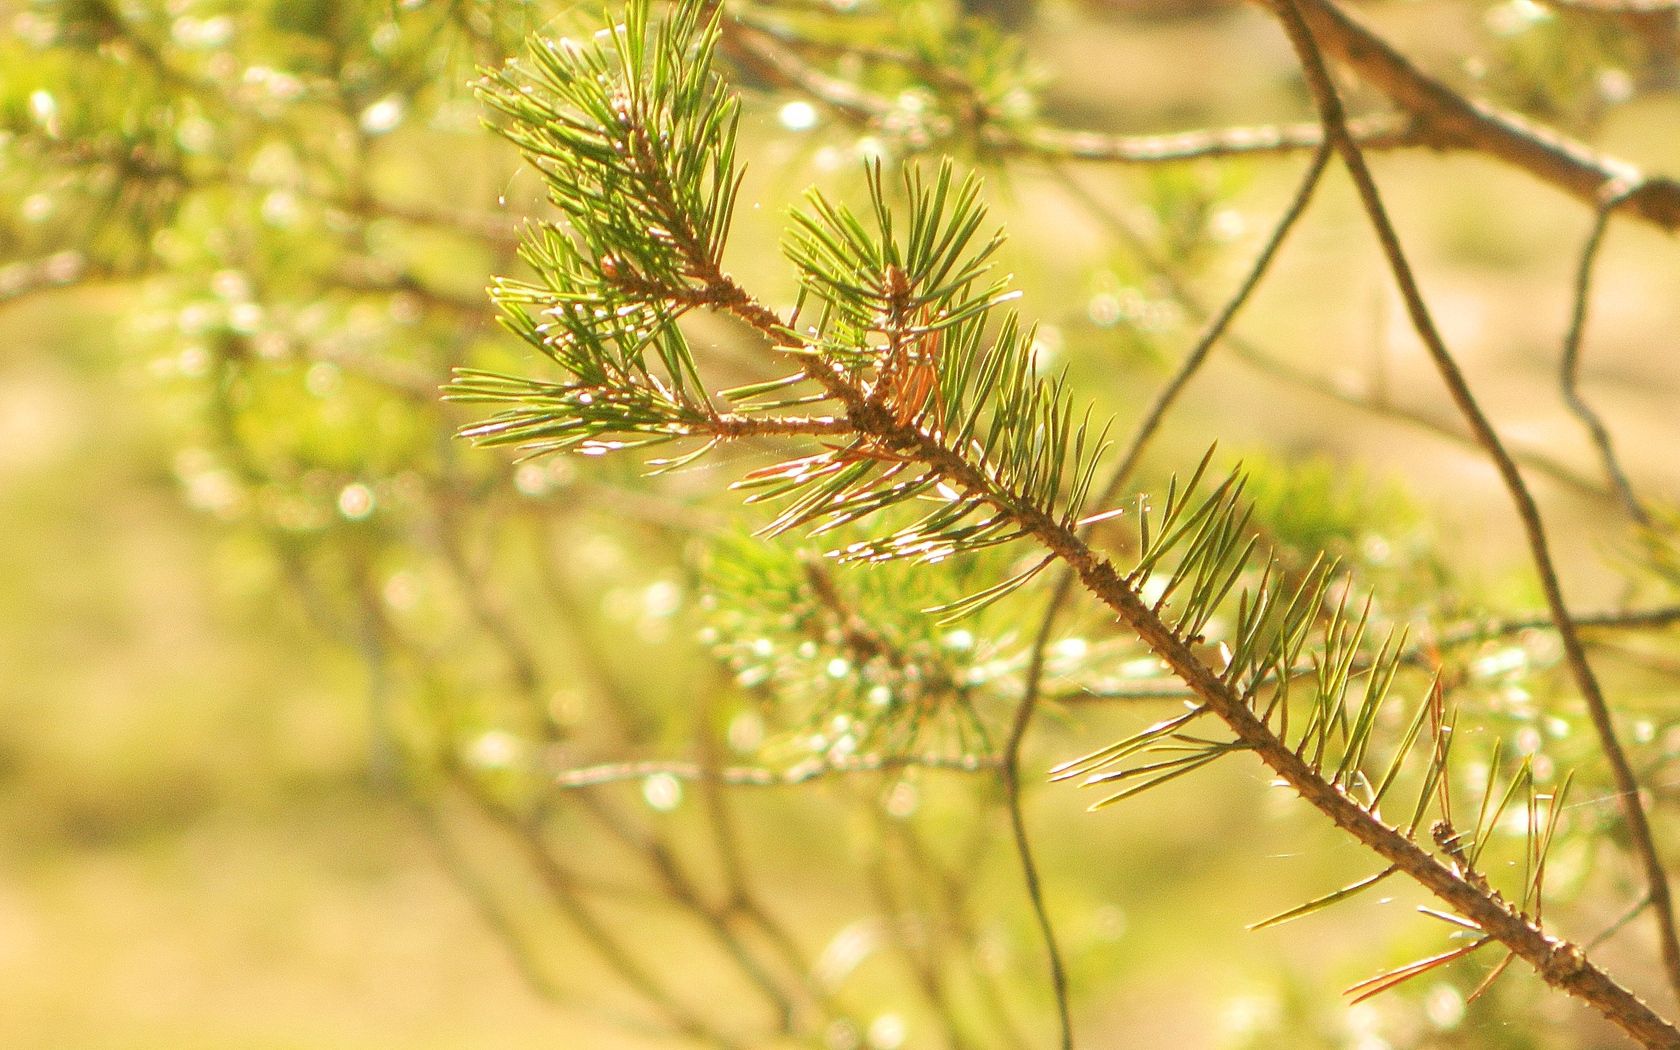 android nature, needle, pine, macro, shine, light, branch, thorns, prickles, sunny